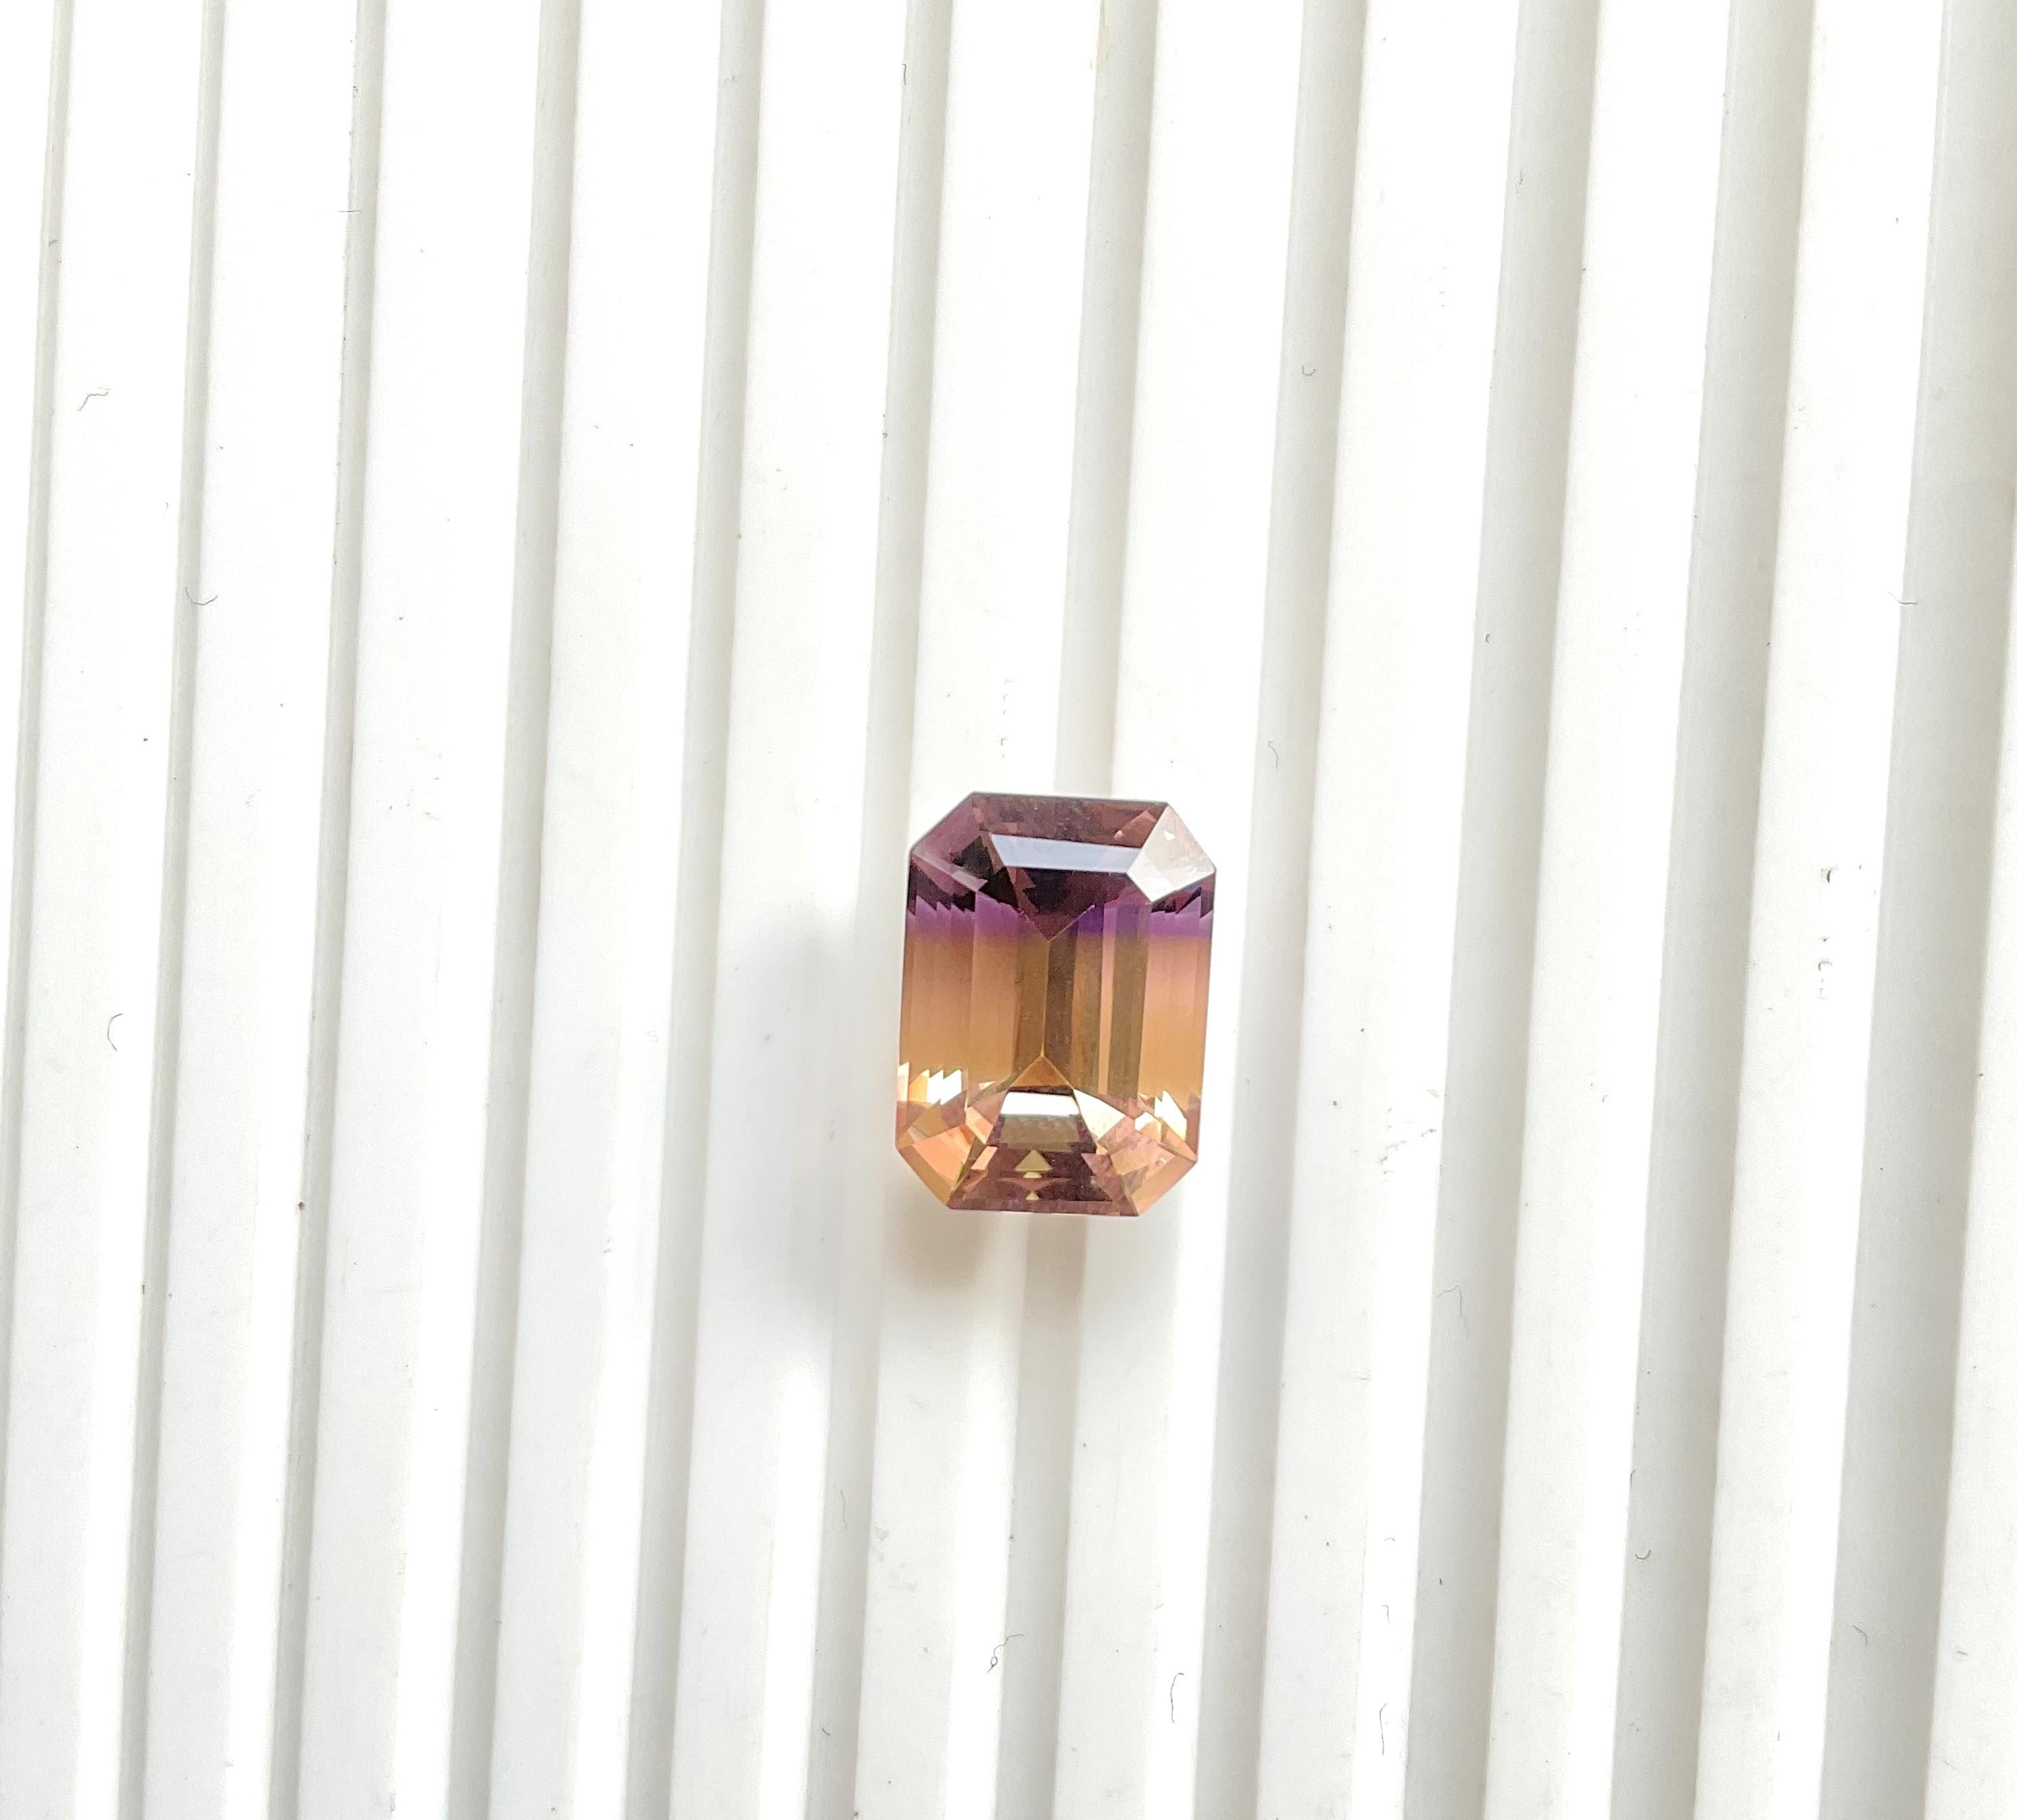 Gemstone Natural Ametrine
Clarity : Loupe Clean
Shape : Octagon
Size : 15x11x9 mm
Weight : 10.45 Carats
Origin : Bolivia
Treatment : None
.